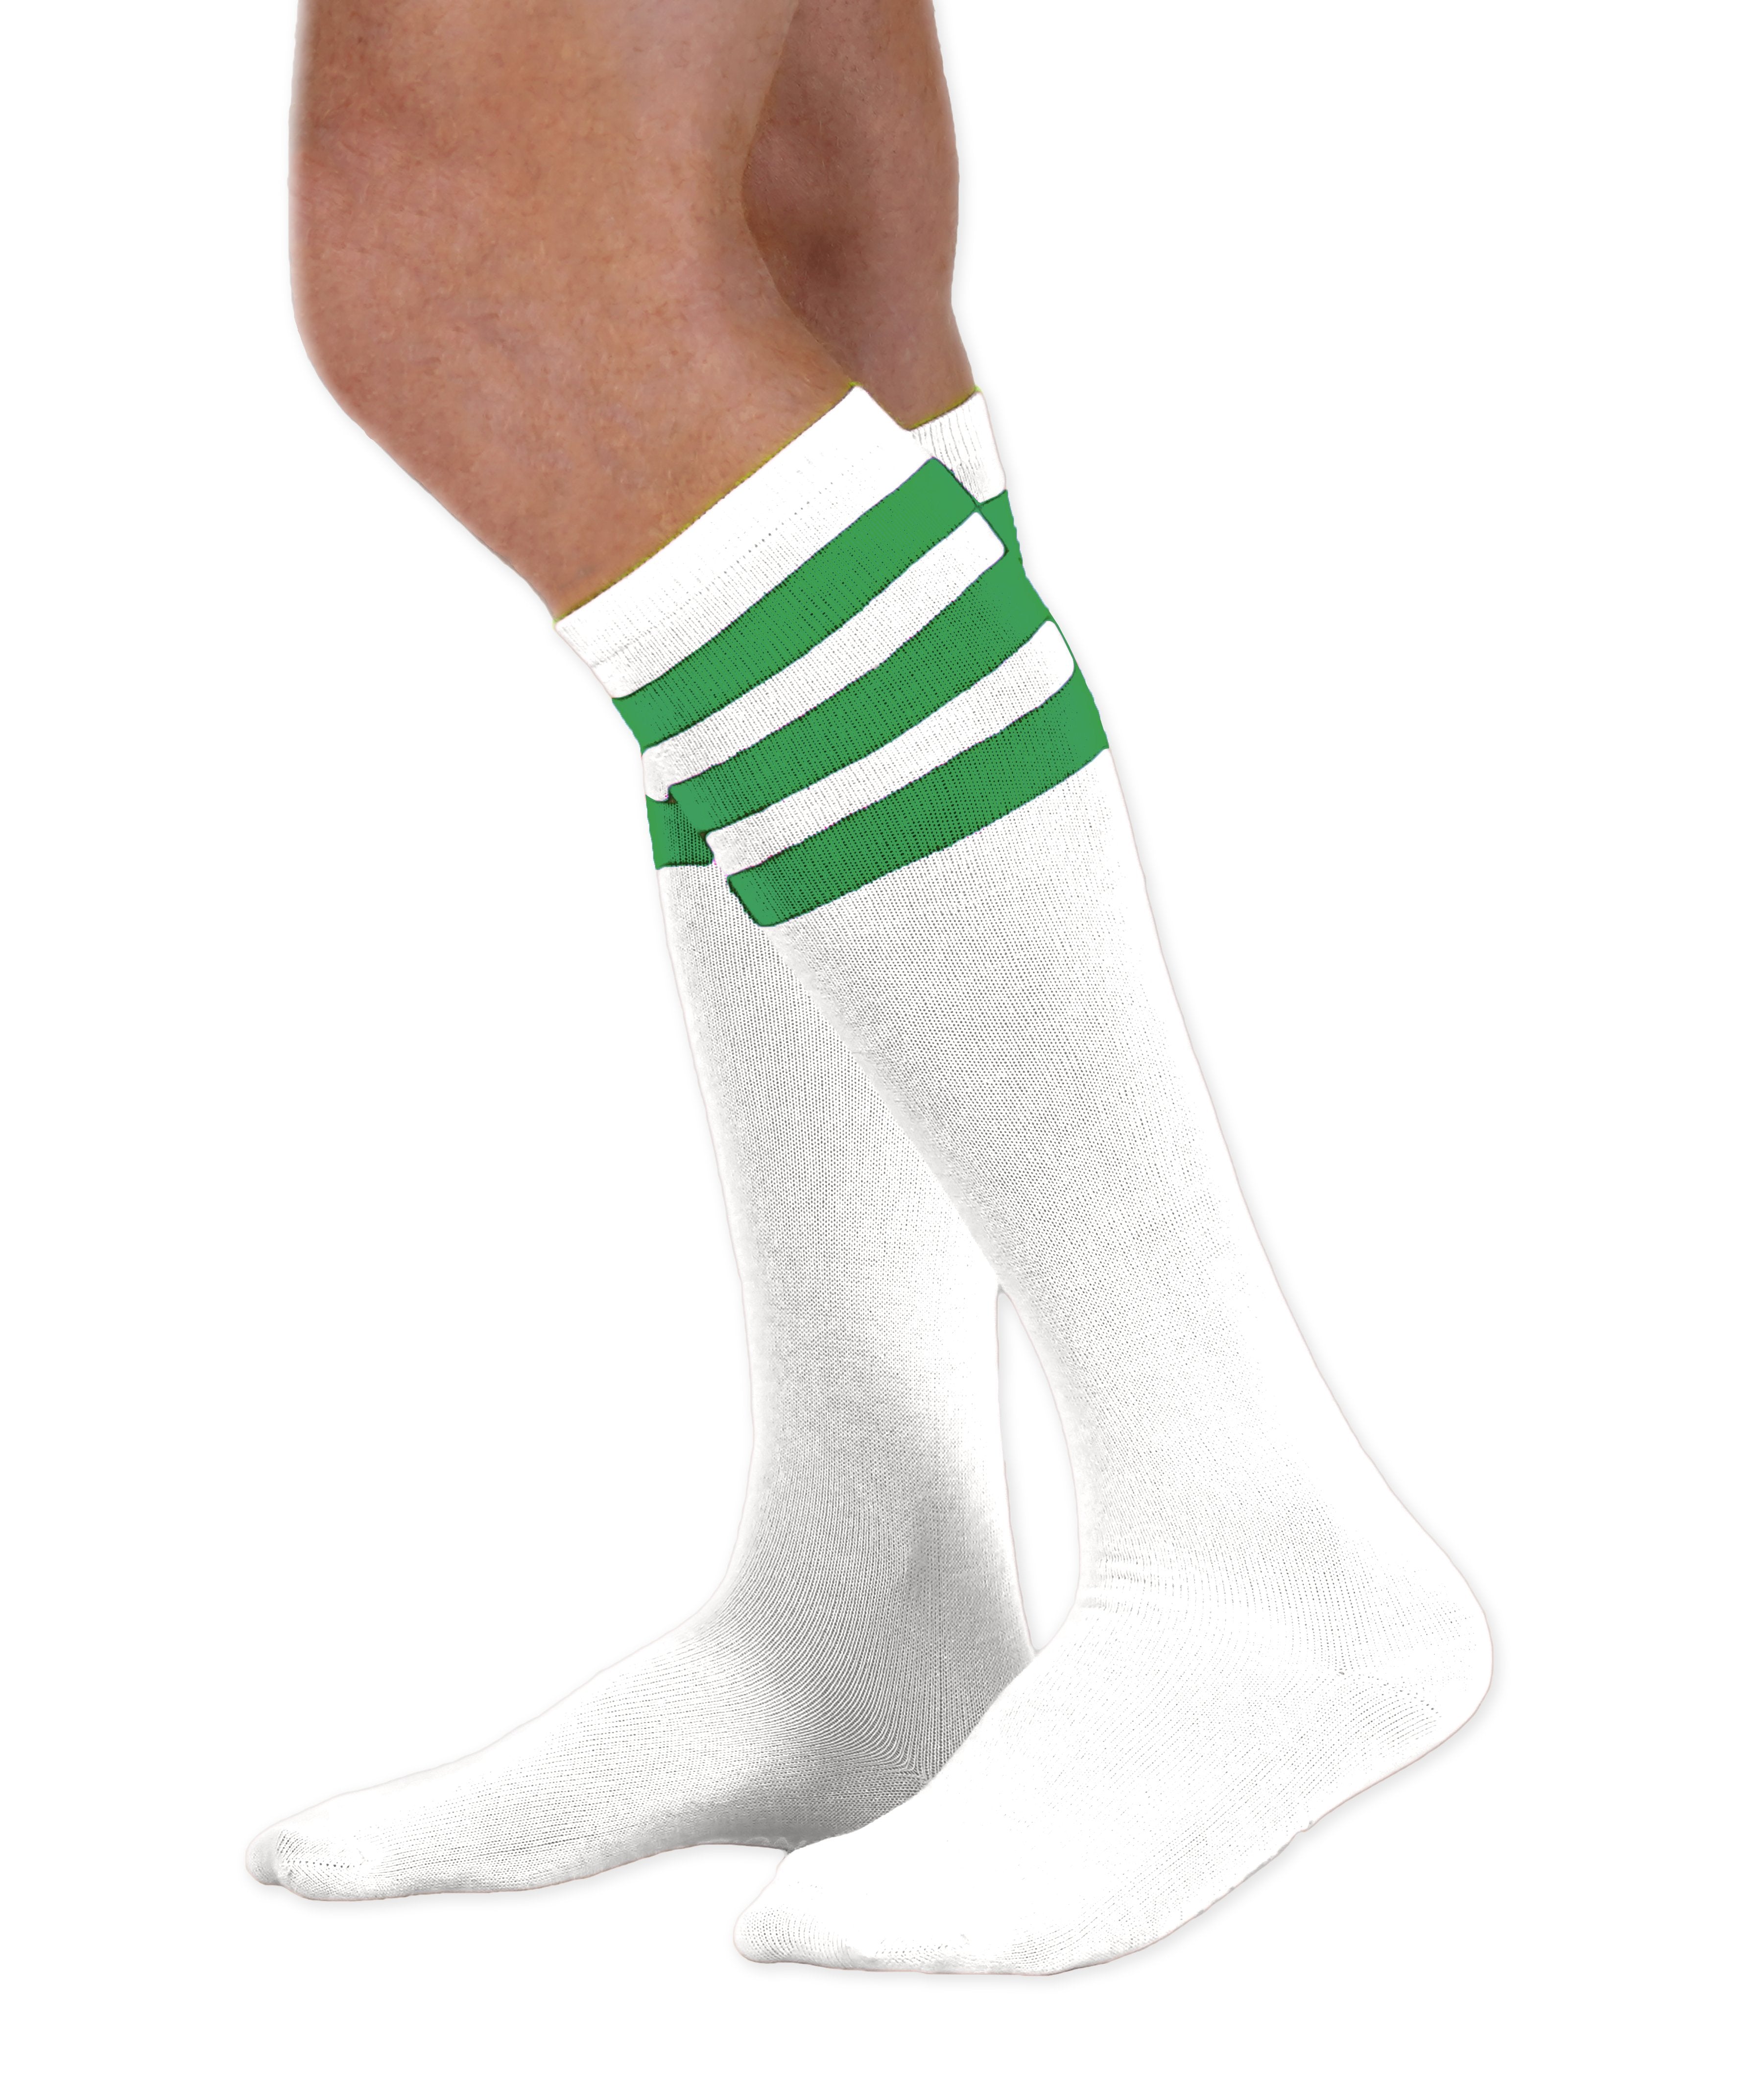 Unisex adult size white knee high tube sock with three kelly green stripes